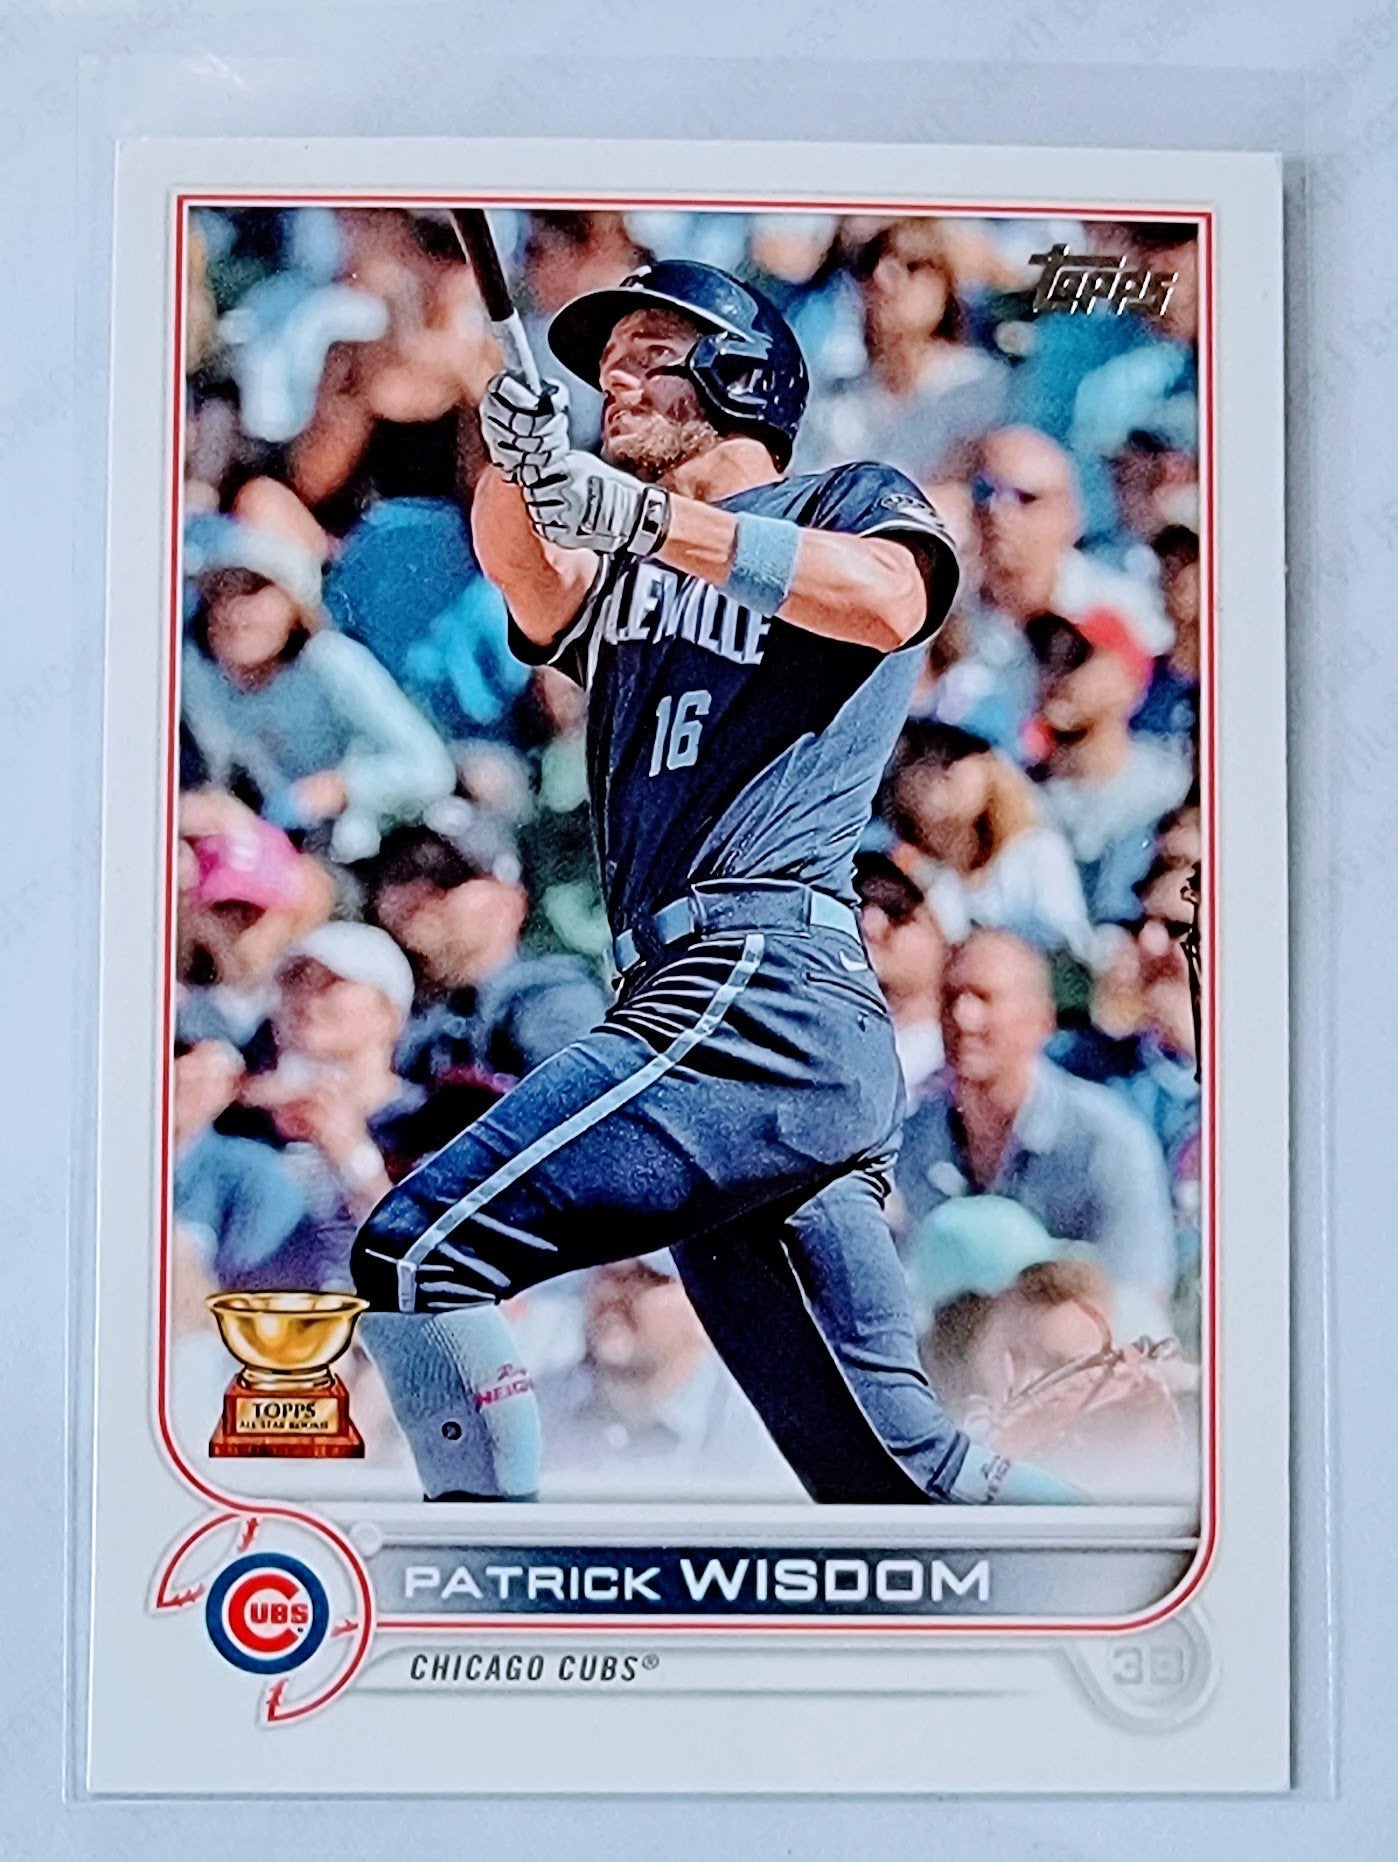 2022 Topps Patrick Wisdom All Star Rookie Cup Baseball Trading Card GRB1 simple Xclusive Collectibles   